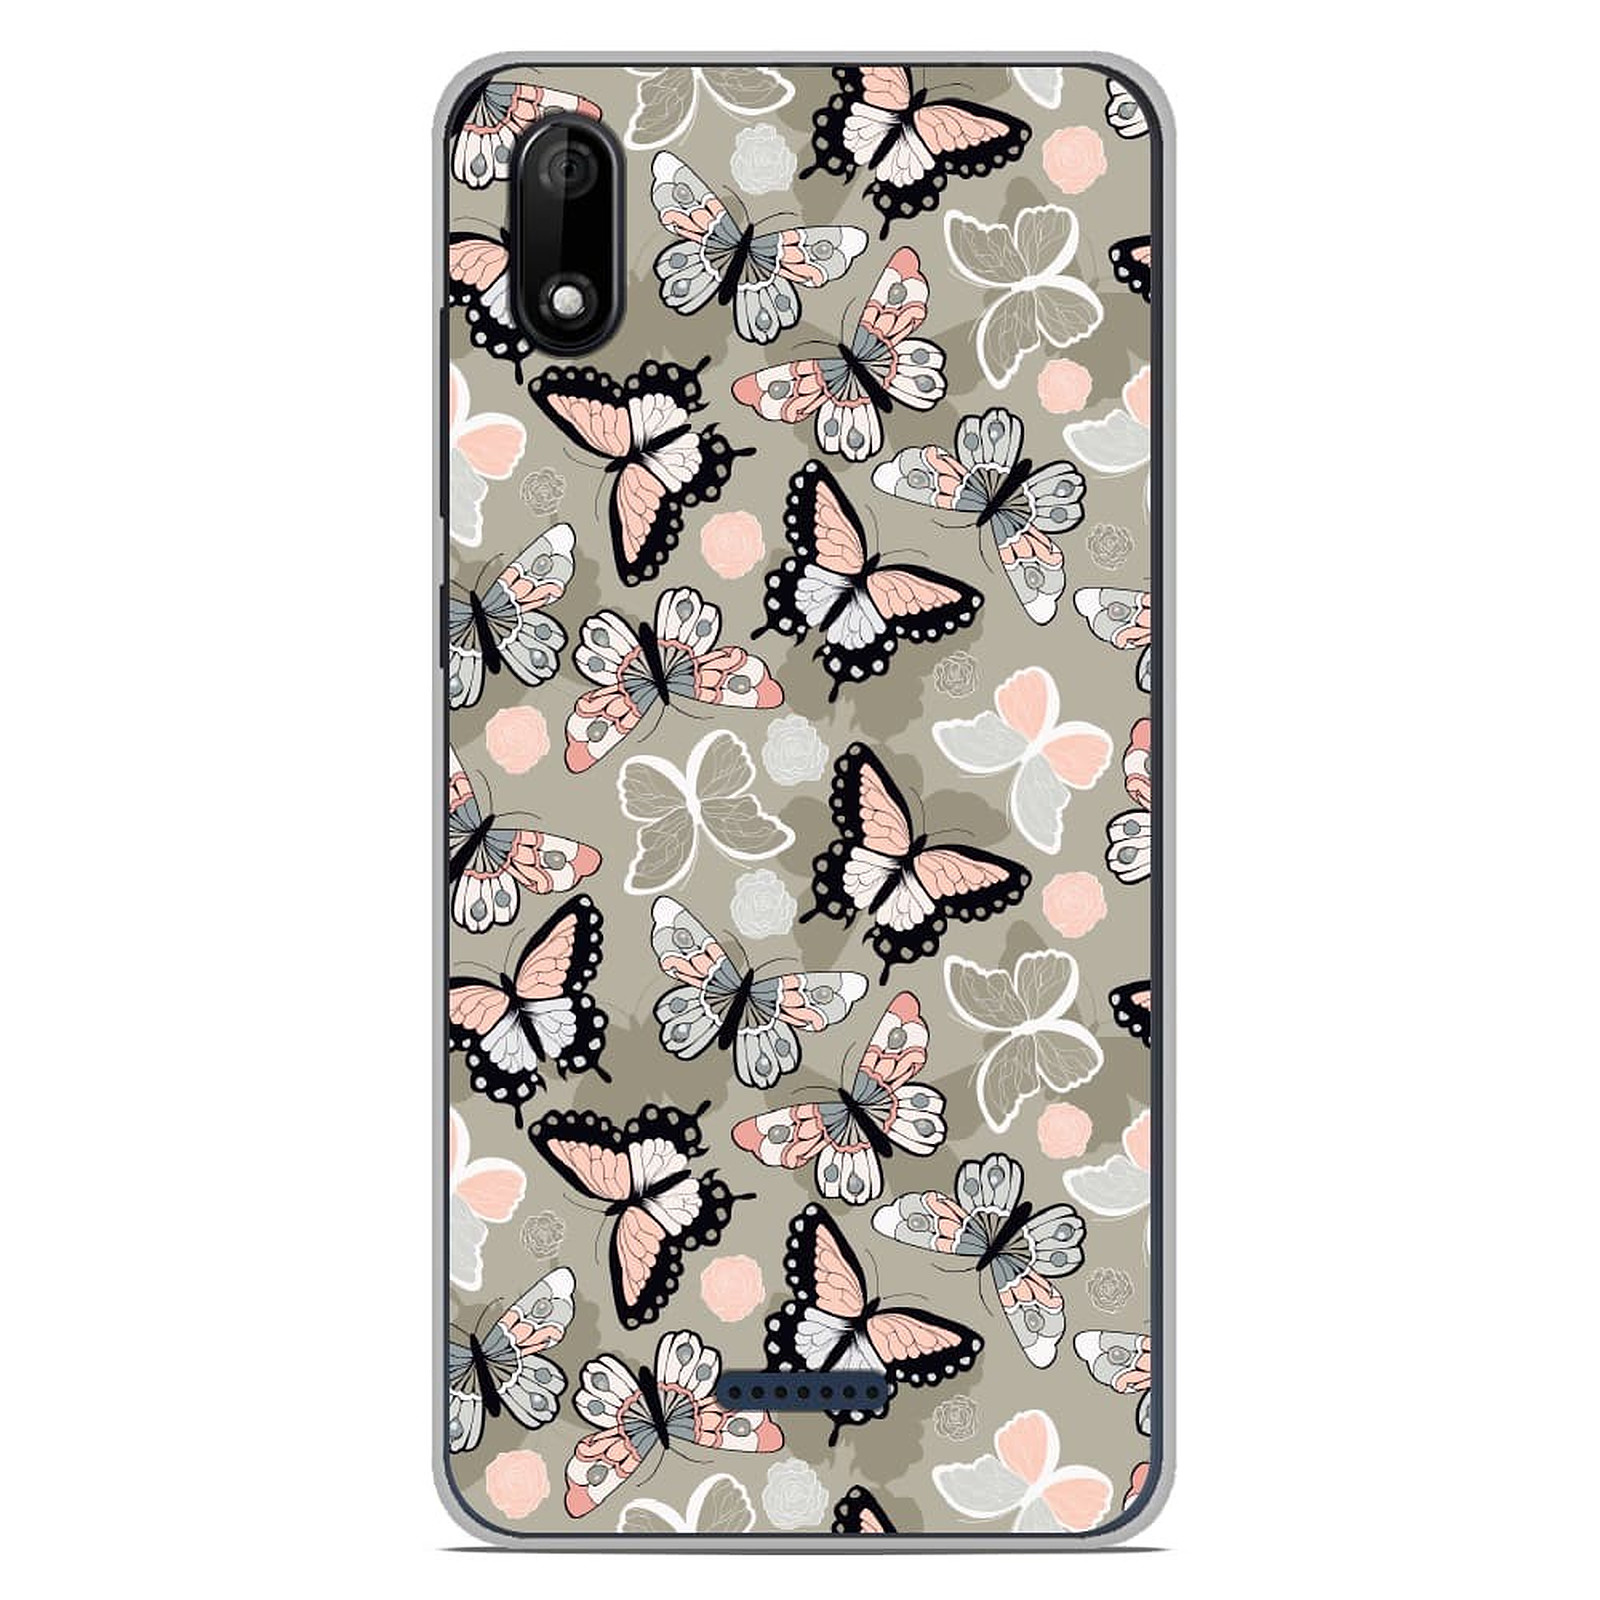 1001 Coques Coque silicone gel Wiko Y60 motif Papillons Vintage - Coque telephone 1001Coques